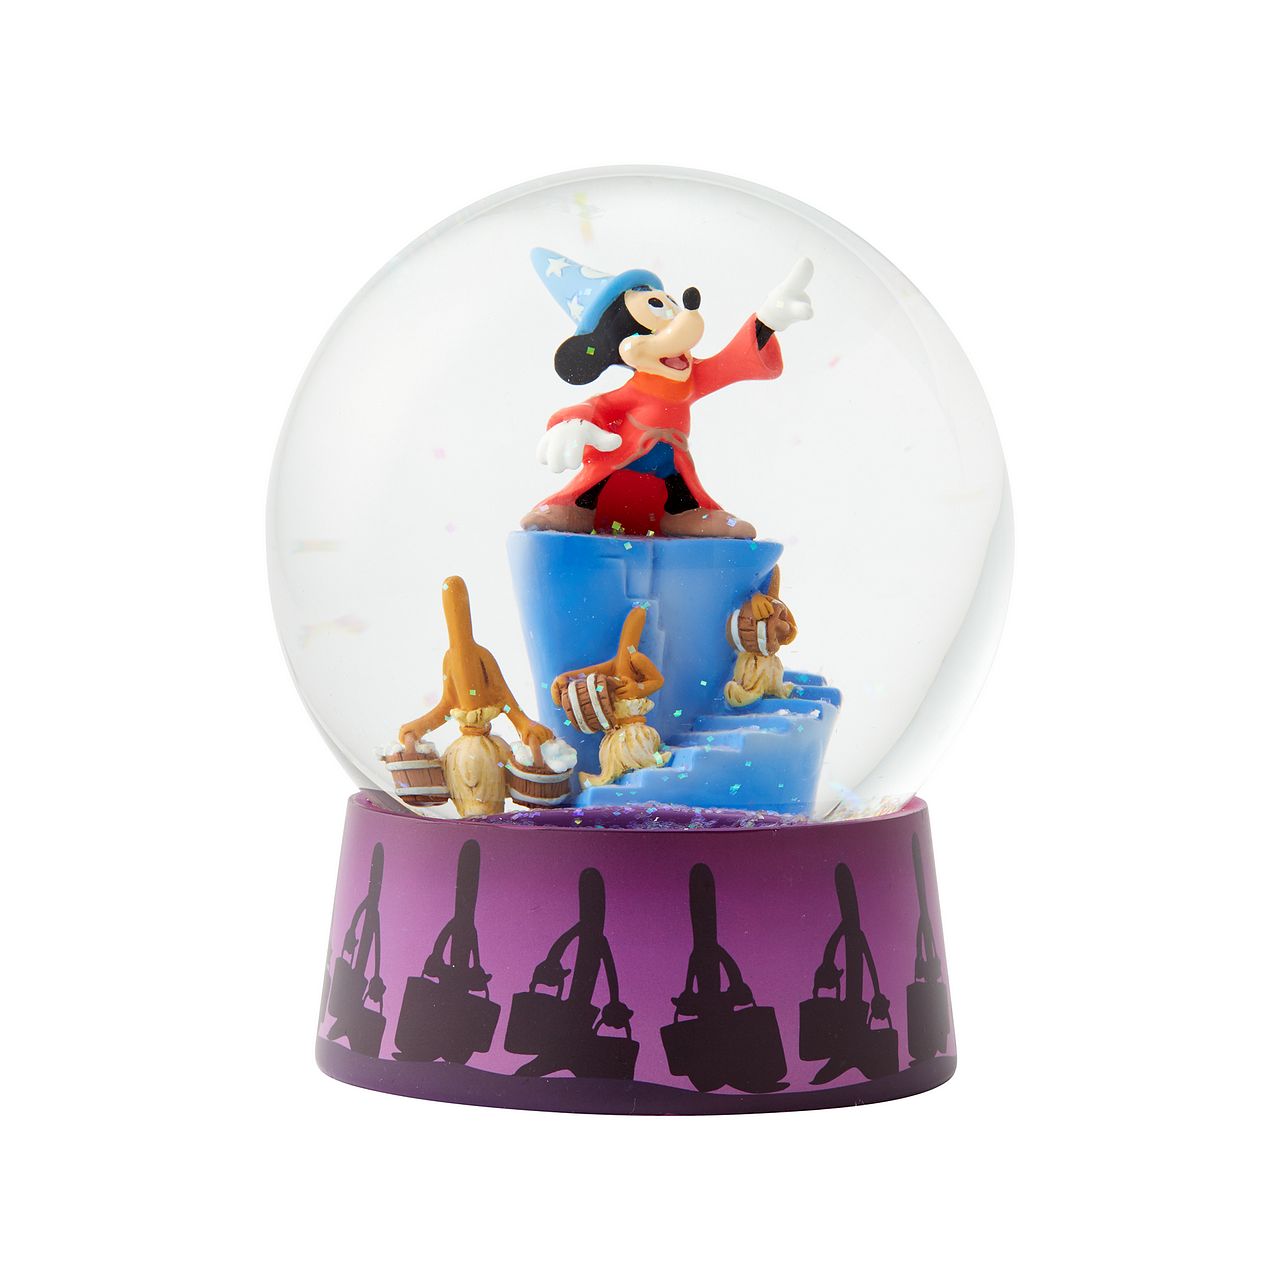 Disney Mickey Mouse Fantasia Waterball  This waterball depicts the iconic scene from Fantasia where The Sorcerer's Apprentice uses magic to make the broomsticks come alive to help Mickey Mouse with his chores.